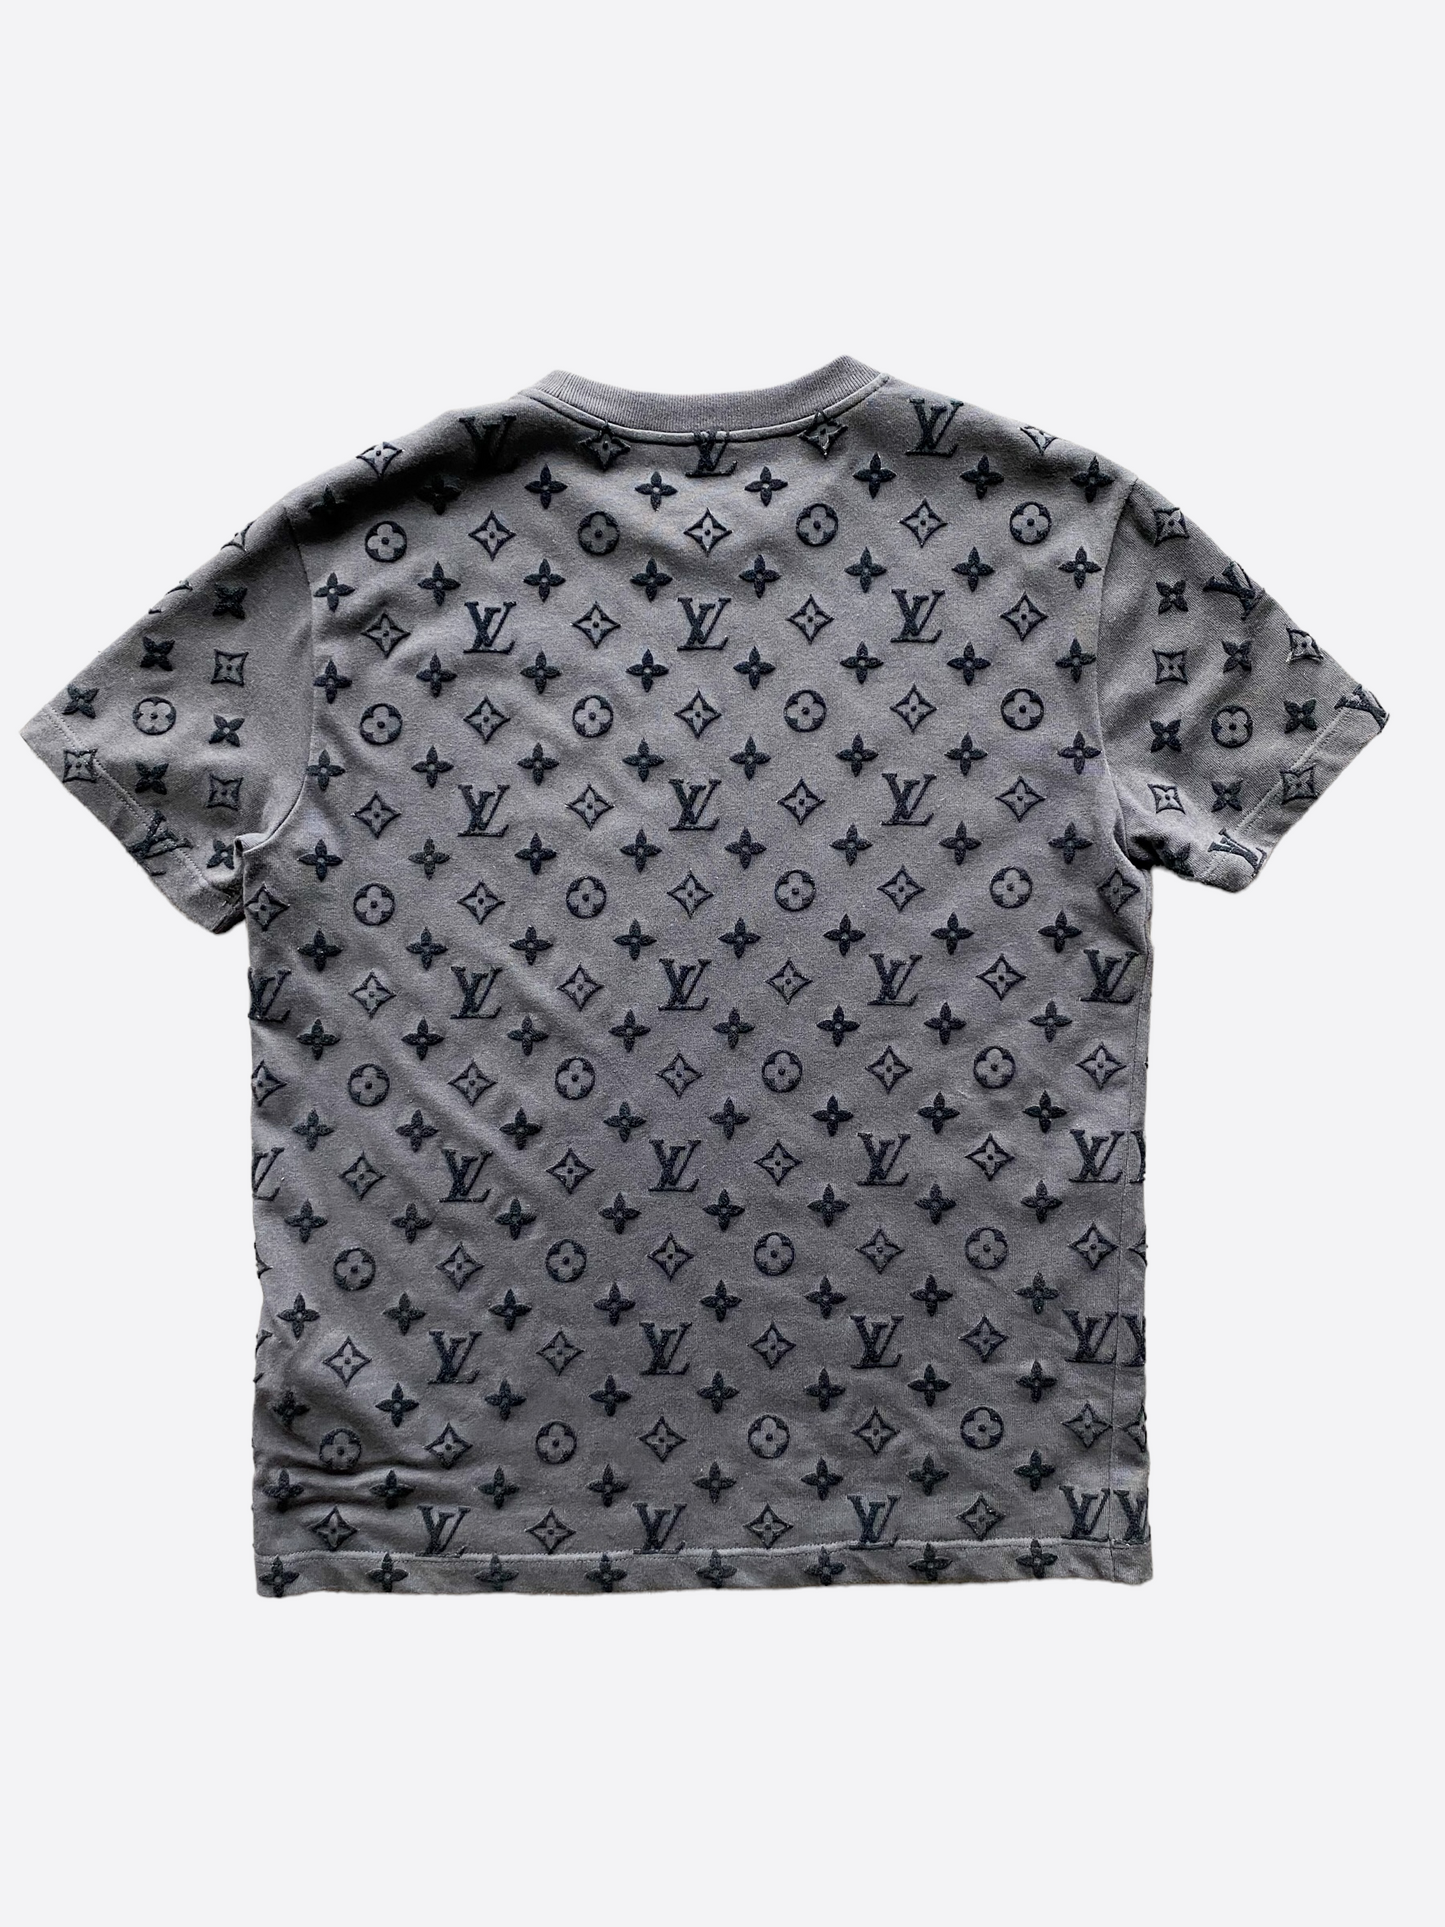 louis vuitton black and gray